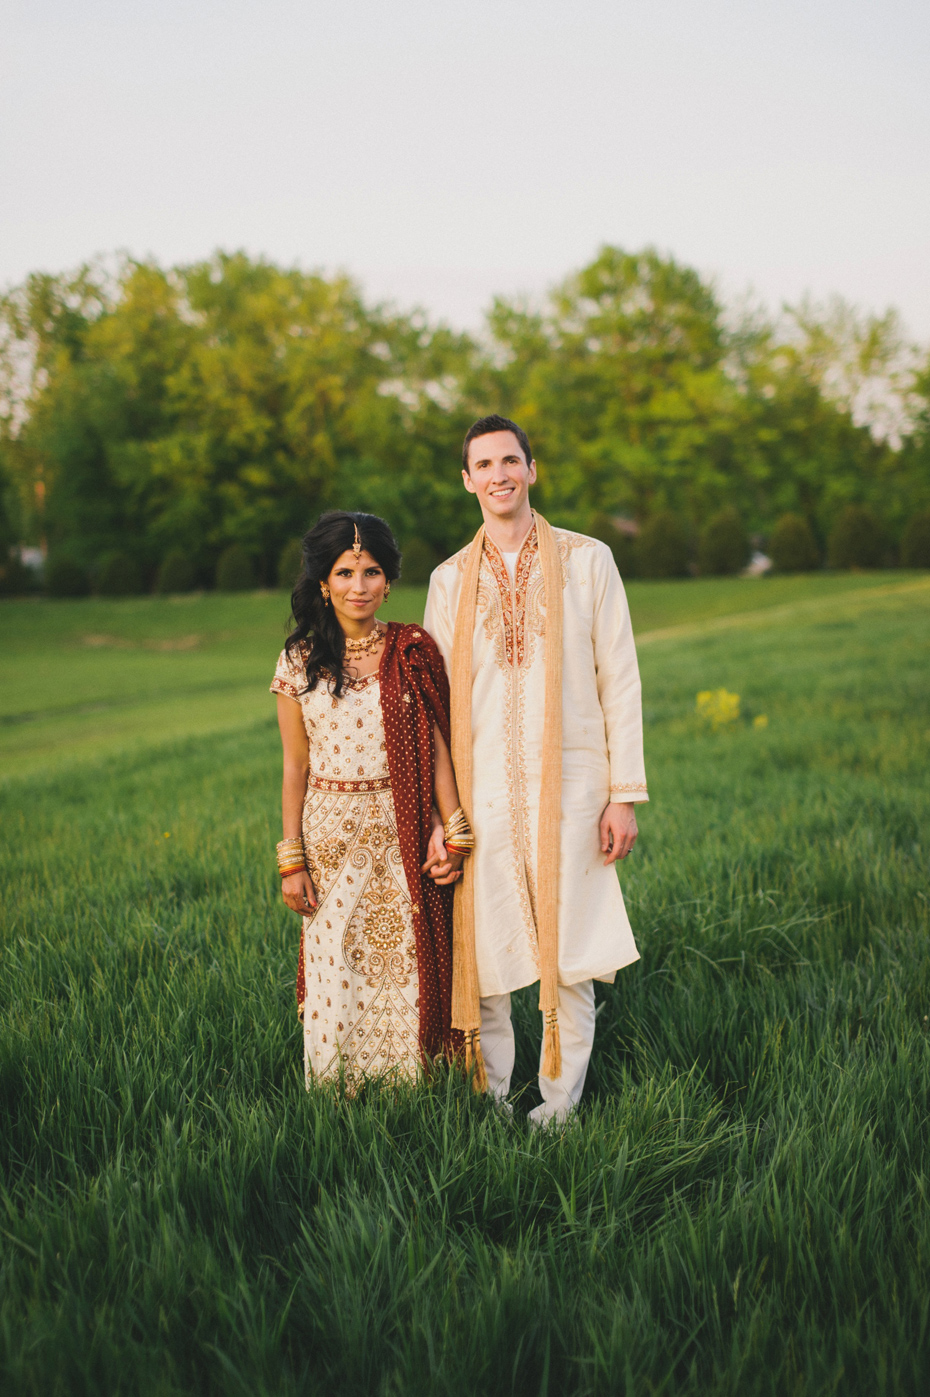 Portraits of a bride and groom in traditional indian wedding clothing, by Ann Arbor wedding photographer Heather Jowett.